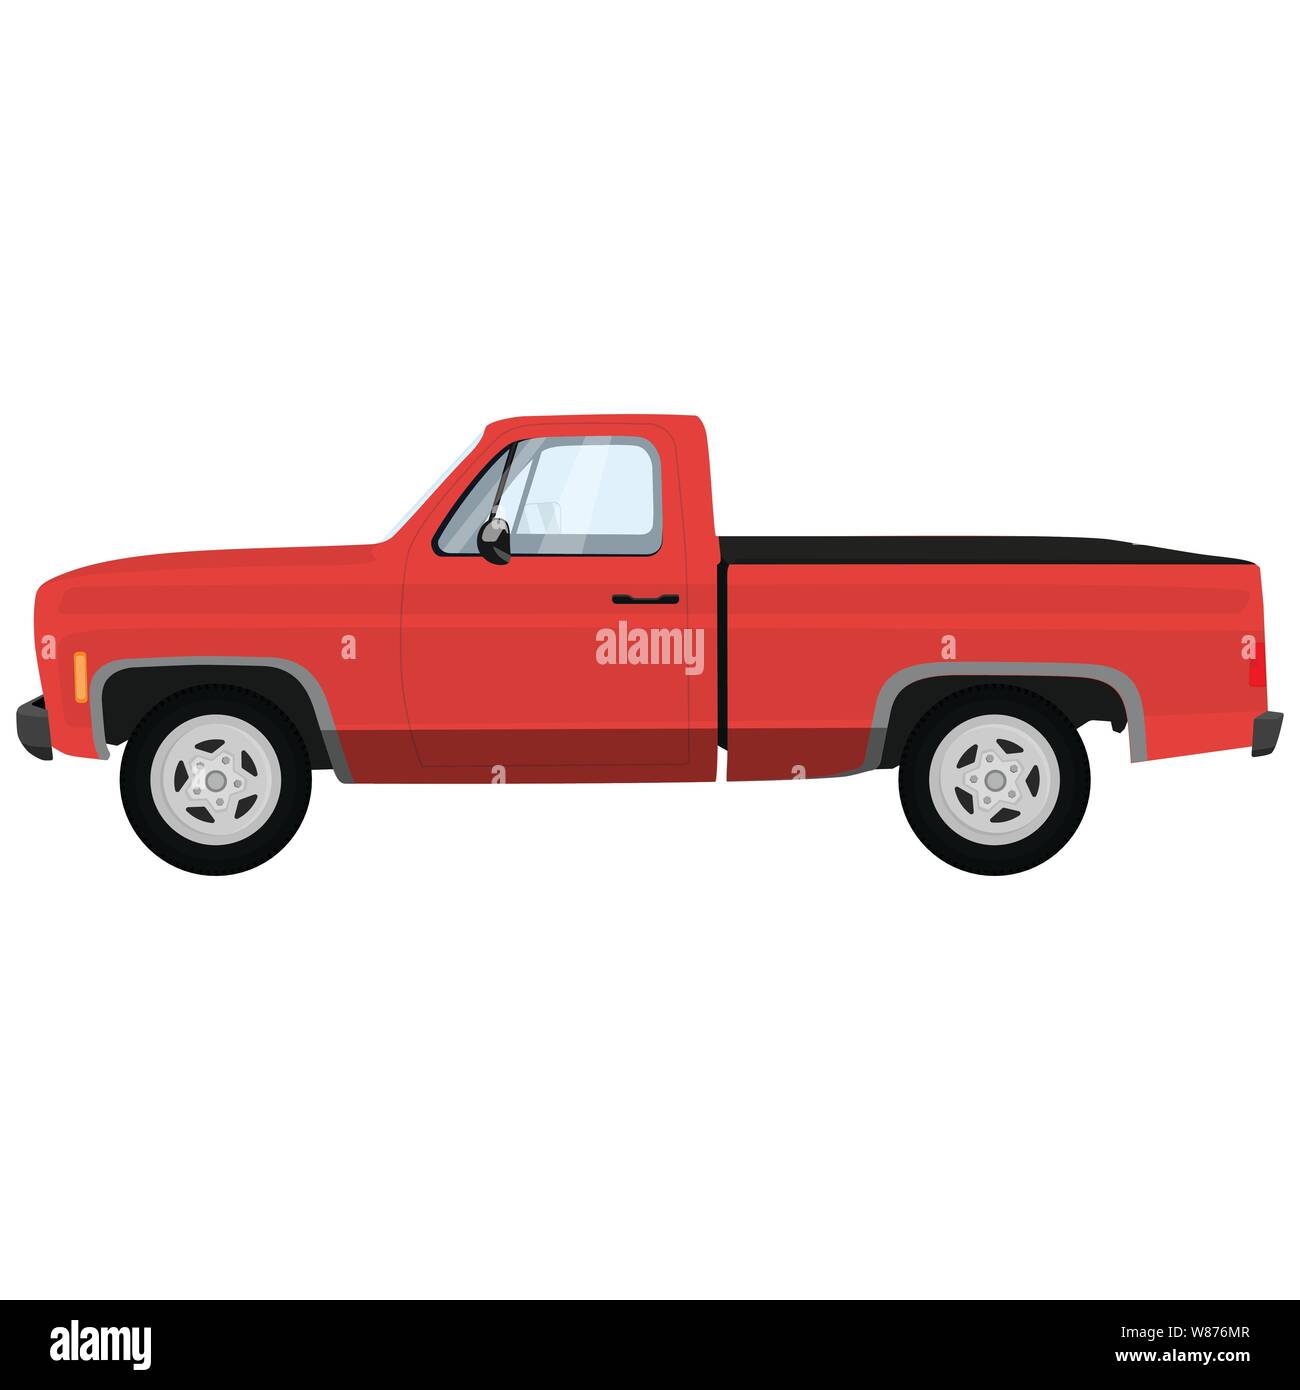 Powerful red modern pick-up truck. Vector illustration Stock Vector